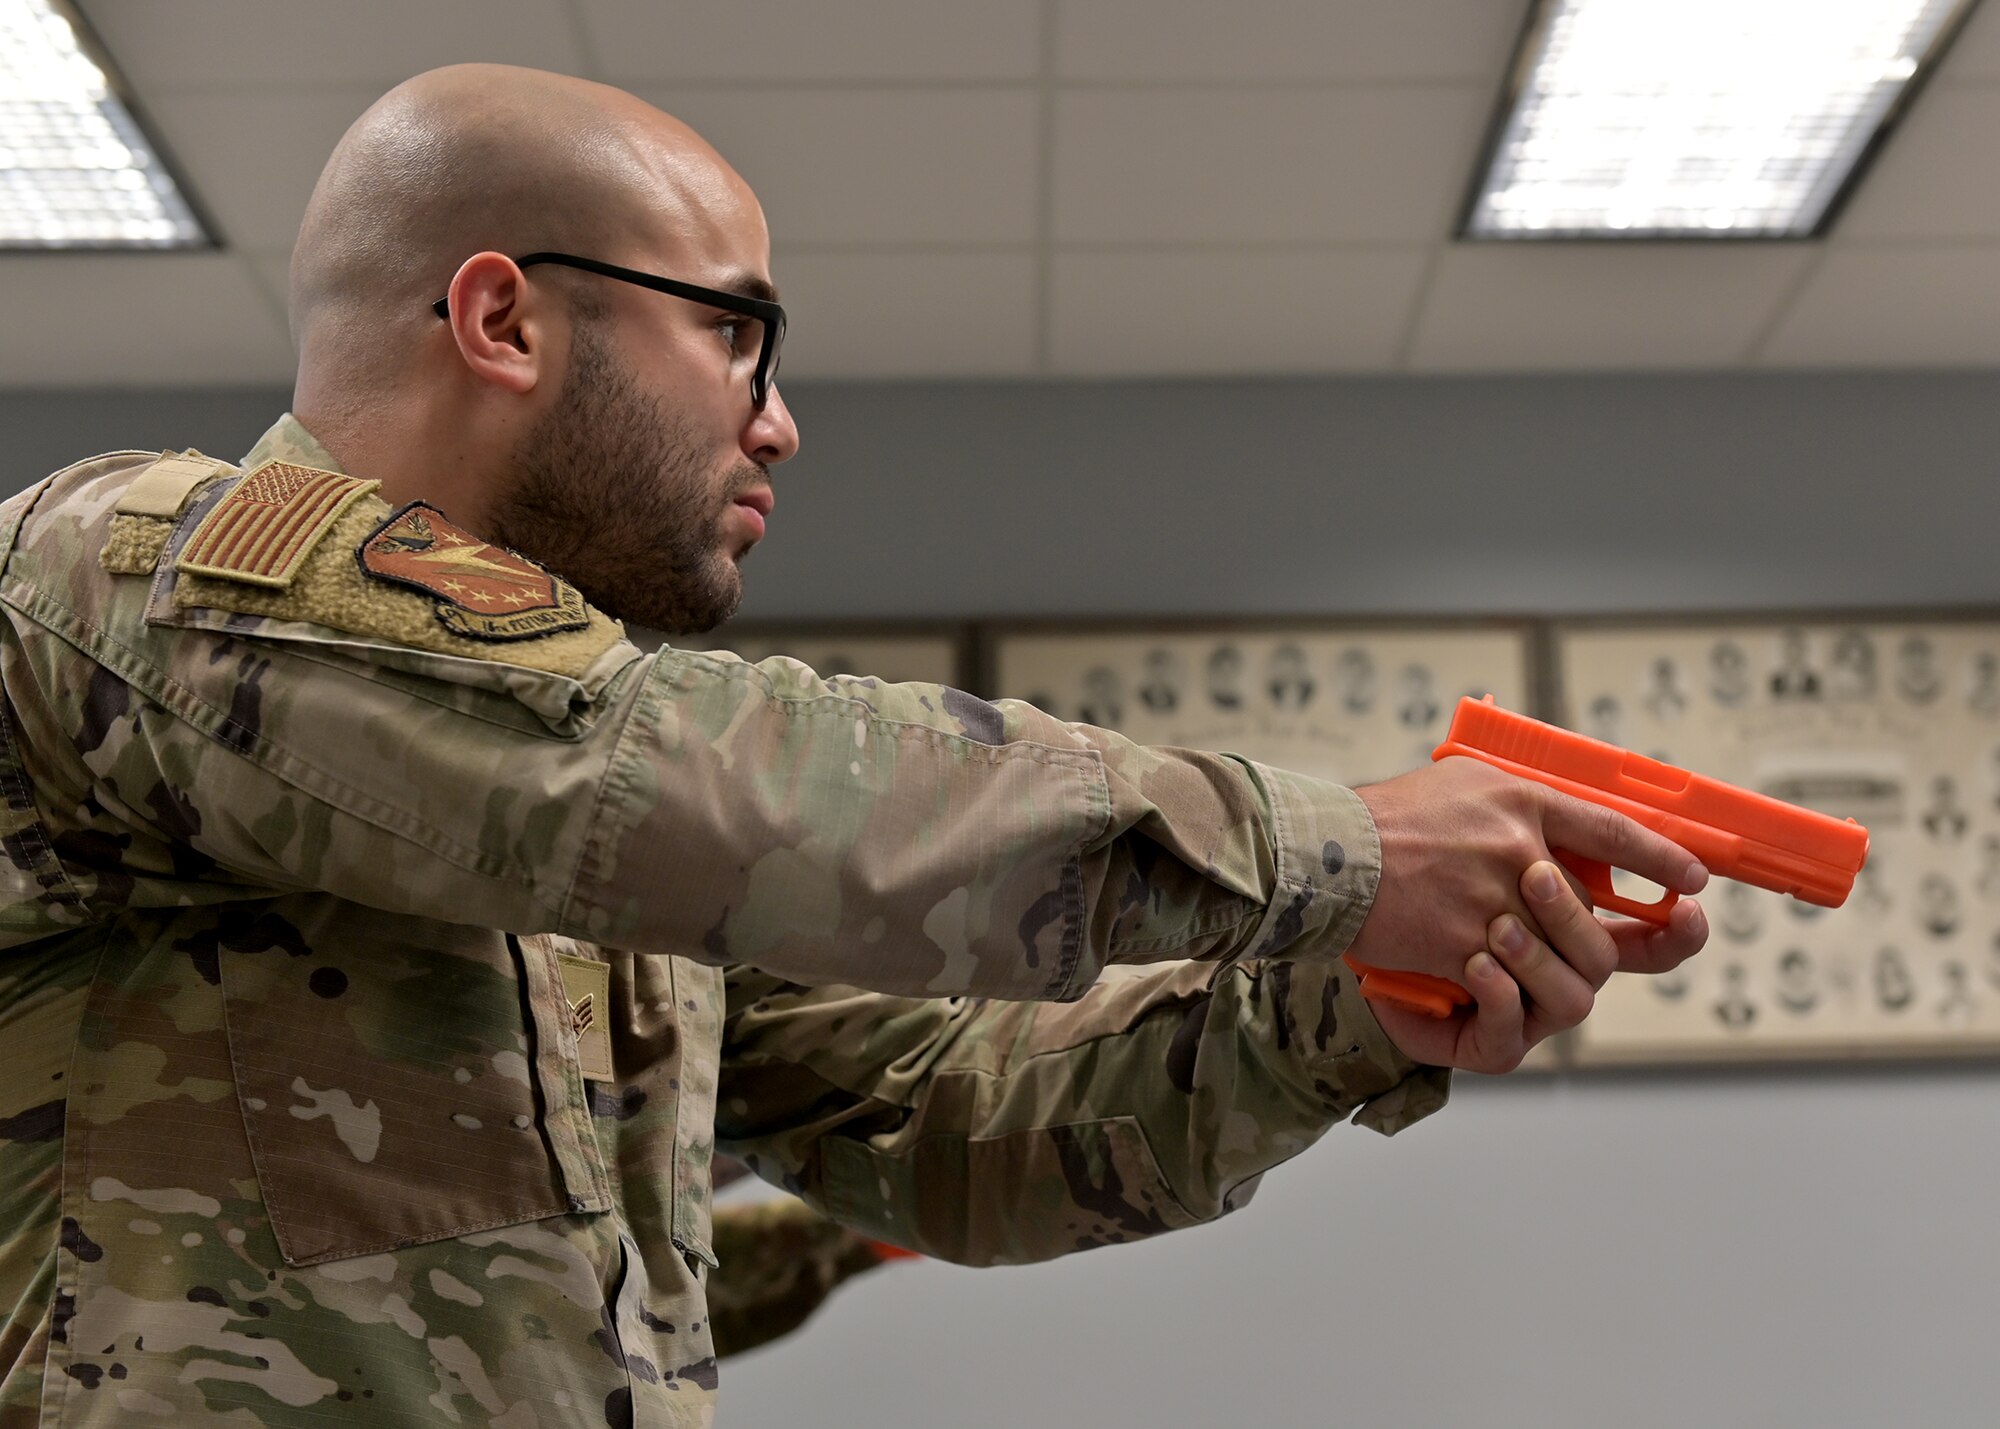 Senior Airman George Nur enters a classroom to engage a simulated active shooter.